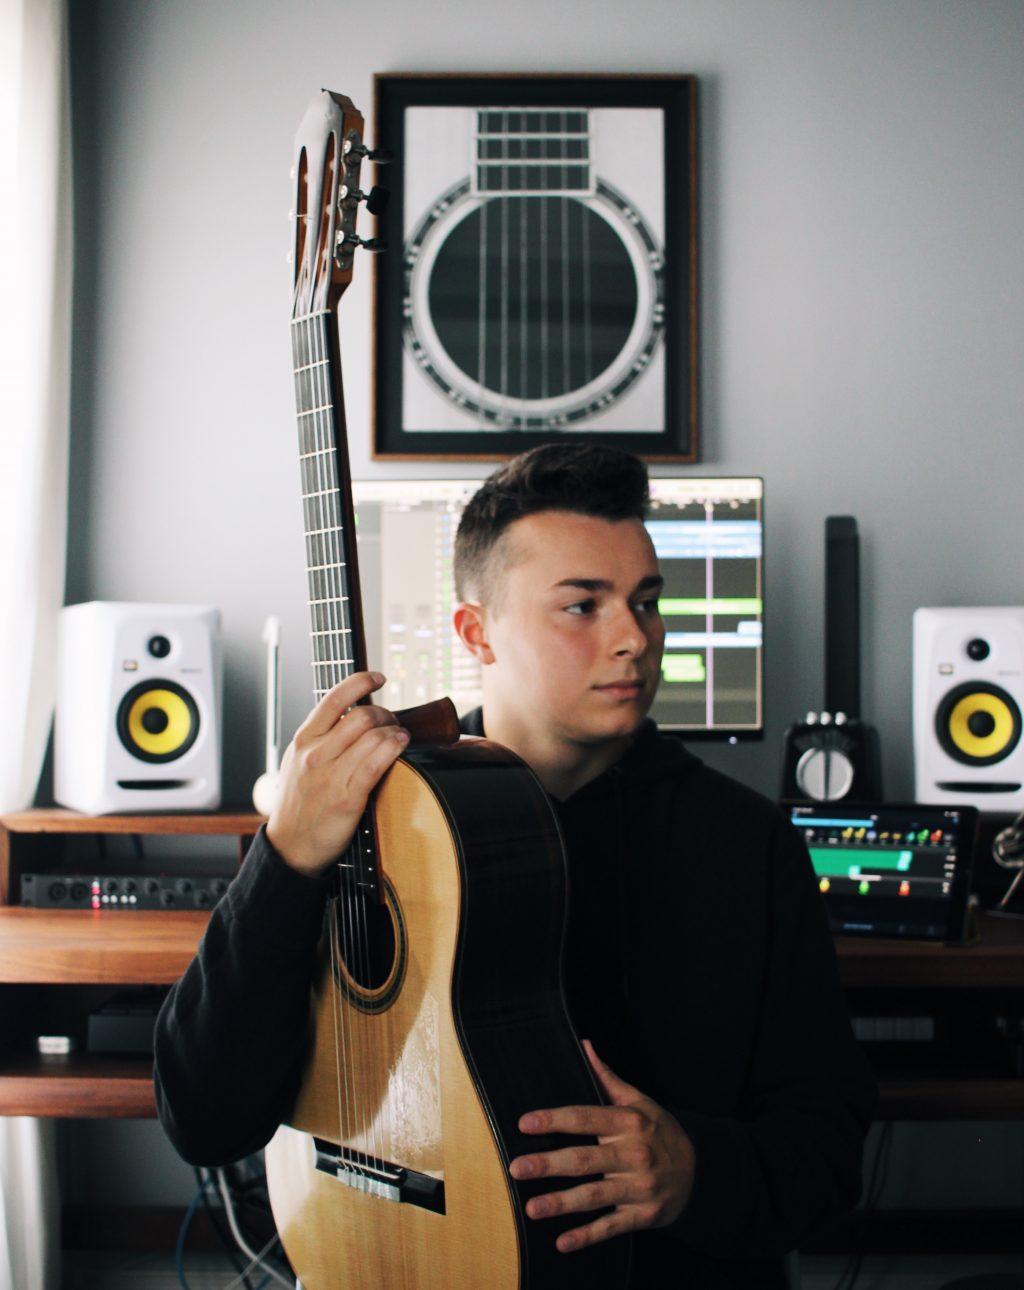 Nolan Harvel poses in his home studio with his guitar last year. Surrounded by speakers, a monitor and other instruments, this is where Harvel said he first started writing his own music. Photo courtesy of Nolan Harvel